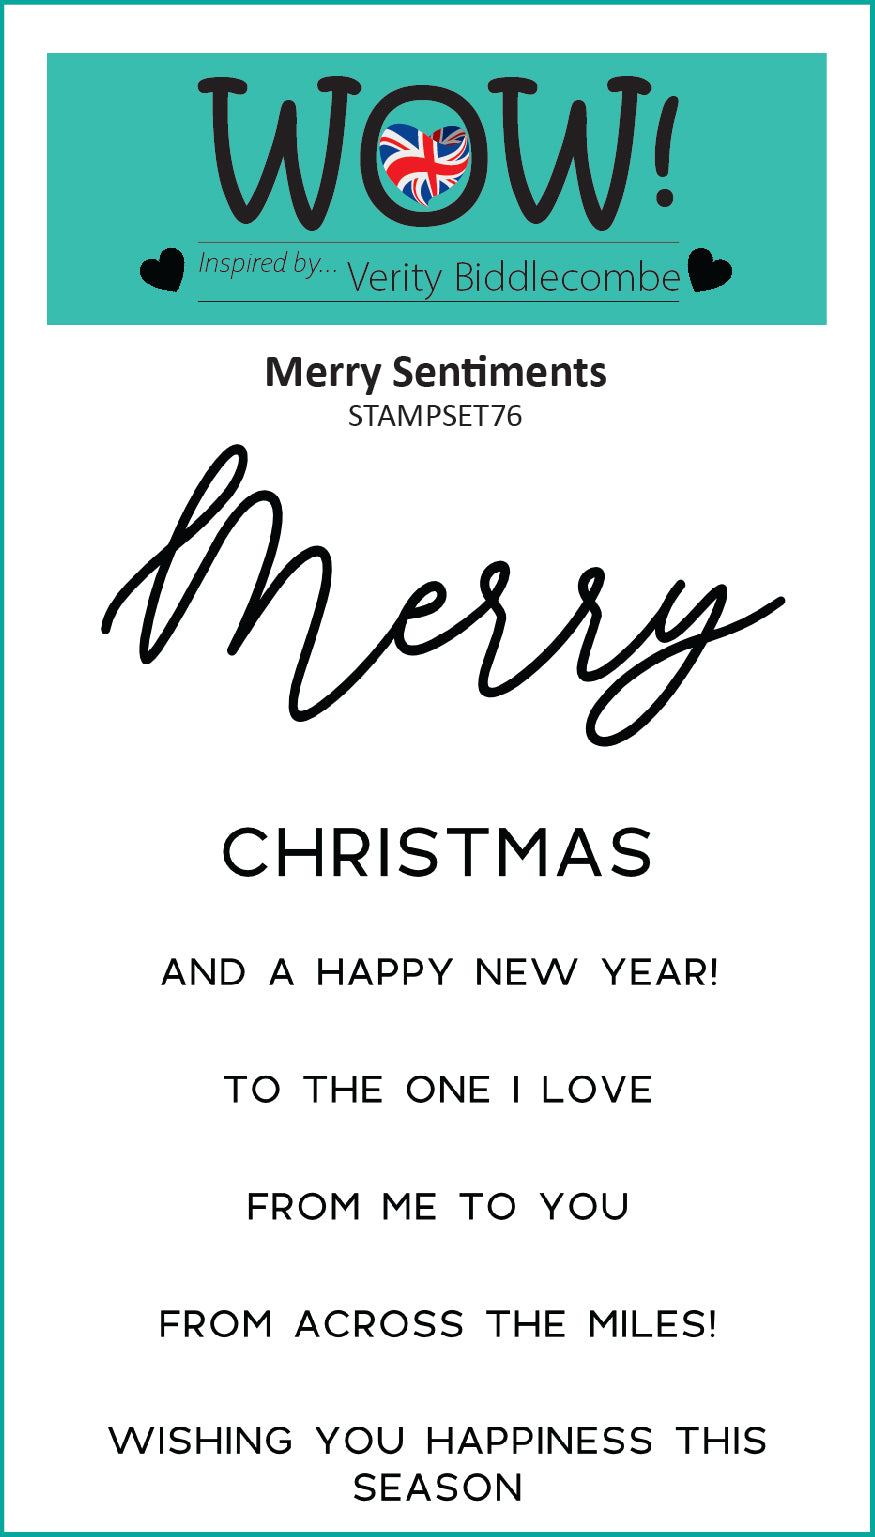 Set de sellos Wow Stamp (A7) - Merry Sentiments (by Verity Biddlecombe)